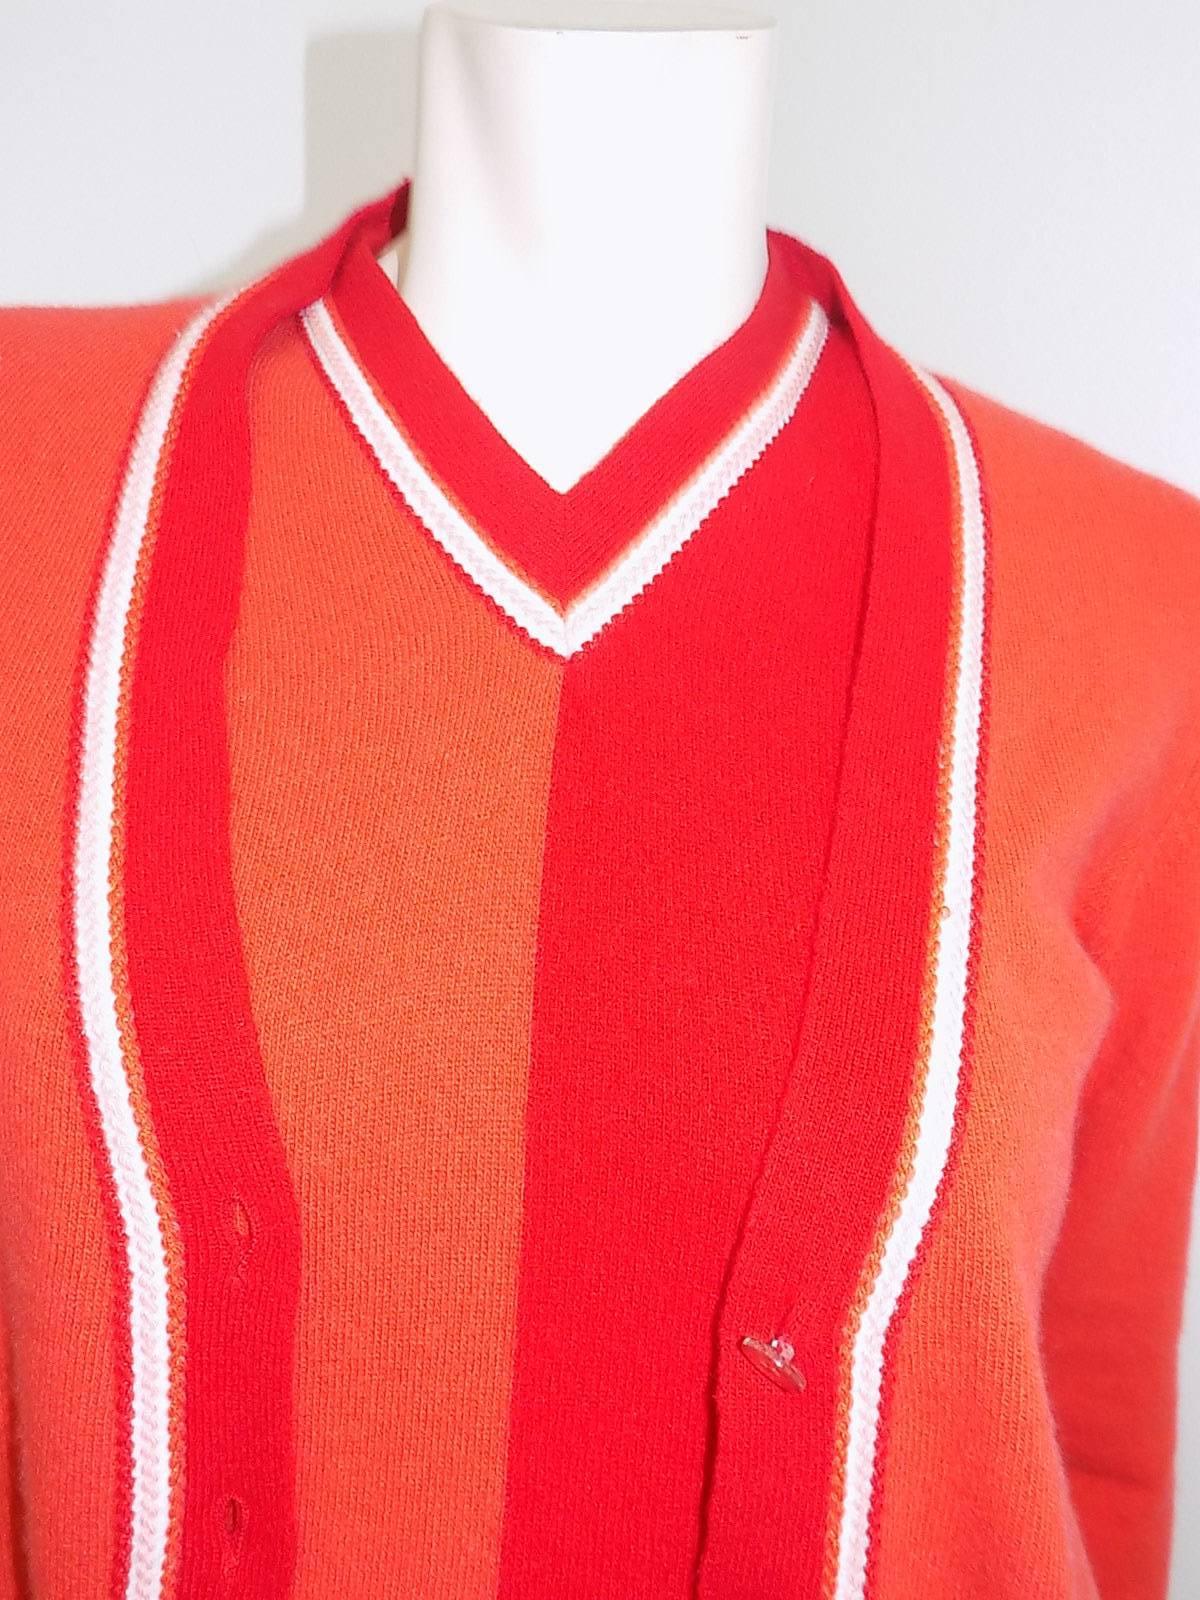 Chanel cashmere red orange 3 piece cardigan sweater set sz 40 In Excellent Condition For Sale In New York, NY